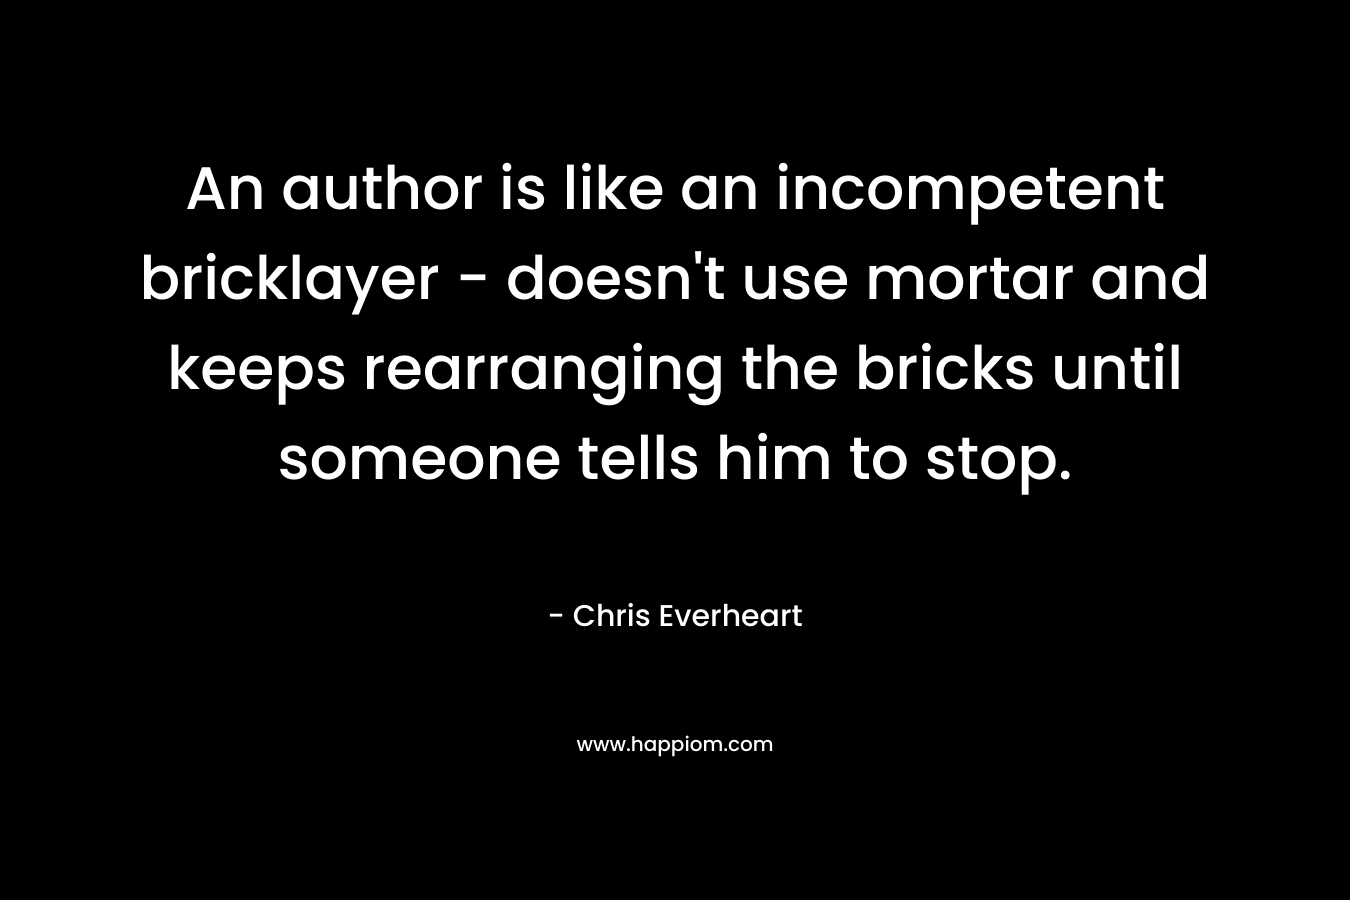 An author is like an incompetent bricklayer – doesn’t use mortar and keeps rearranging the bricks until someone tells him to stop. – Chris Everheart